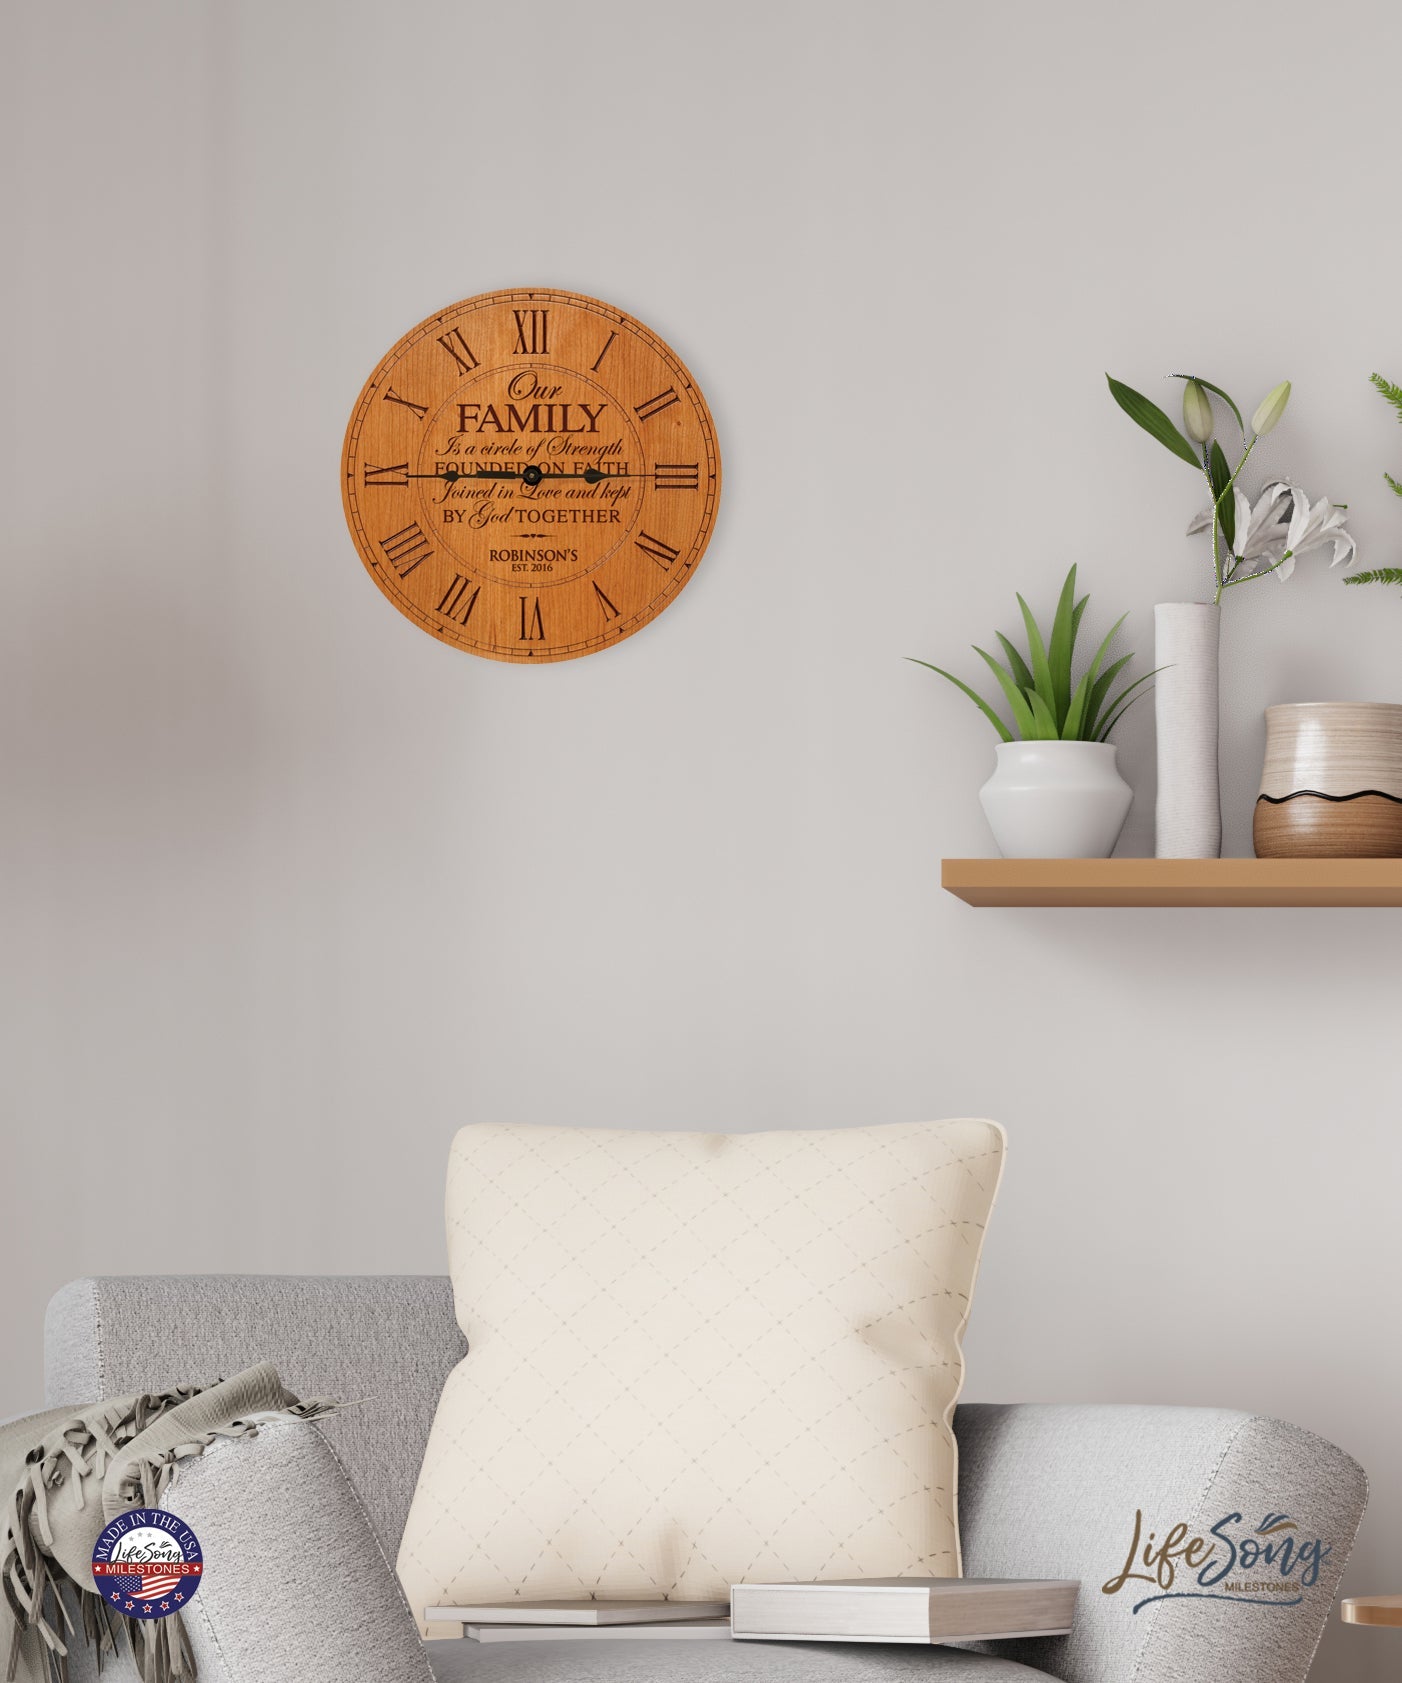 Handmade Vinyl Wedding Silhouette Personalized Wall Clock Gifts Unique Home  Decor And Personality Gift 12 Inches, Black From Jzsp0916, $19.1 |  DHgate.Com